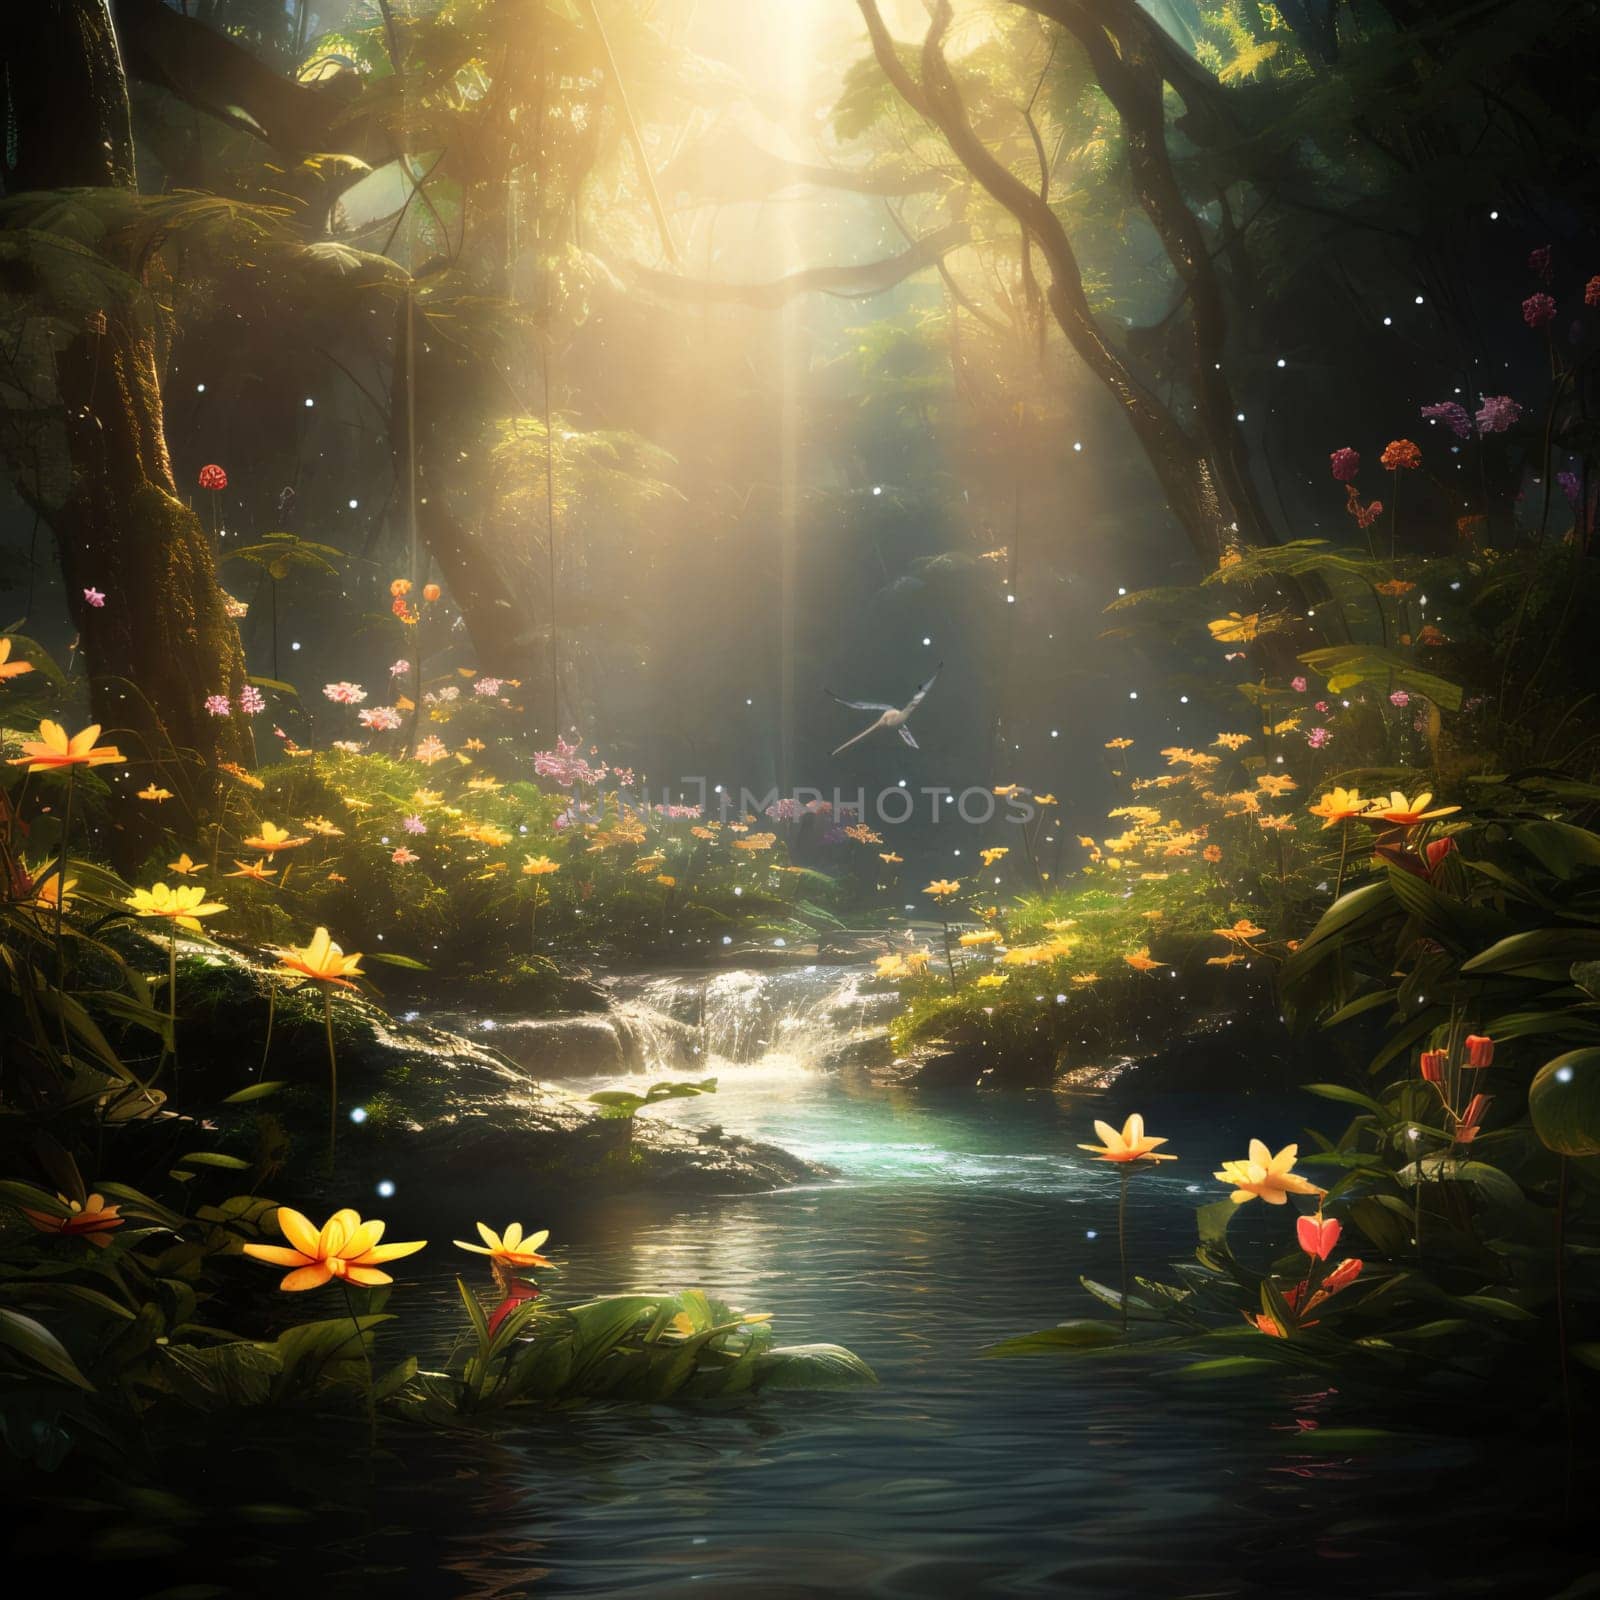 Waterfall in a tropical forest with flowers and birds. Digital painting by ThemesS